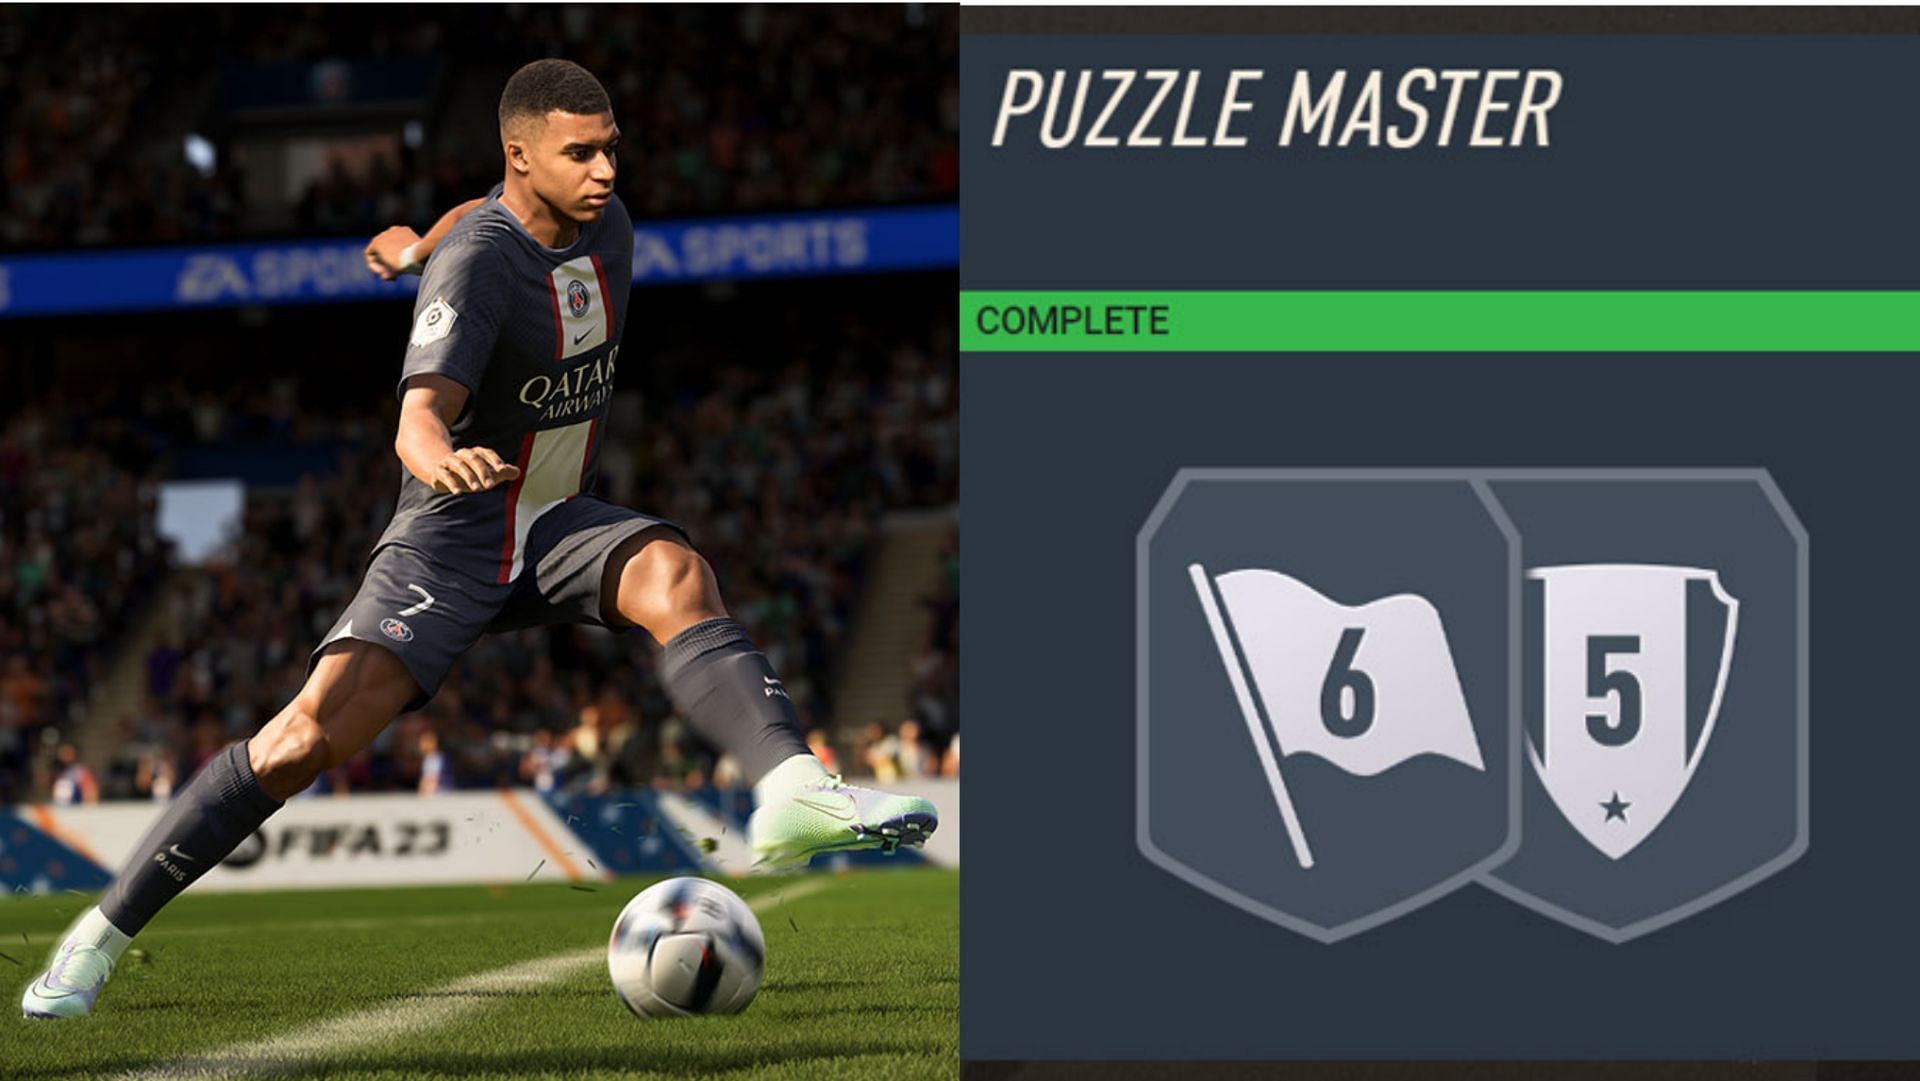 The Puzzle Master SBC can be completed at any time by the players (Images via EA Sports)